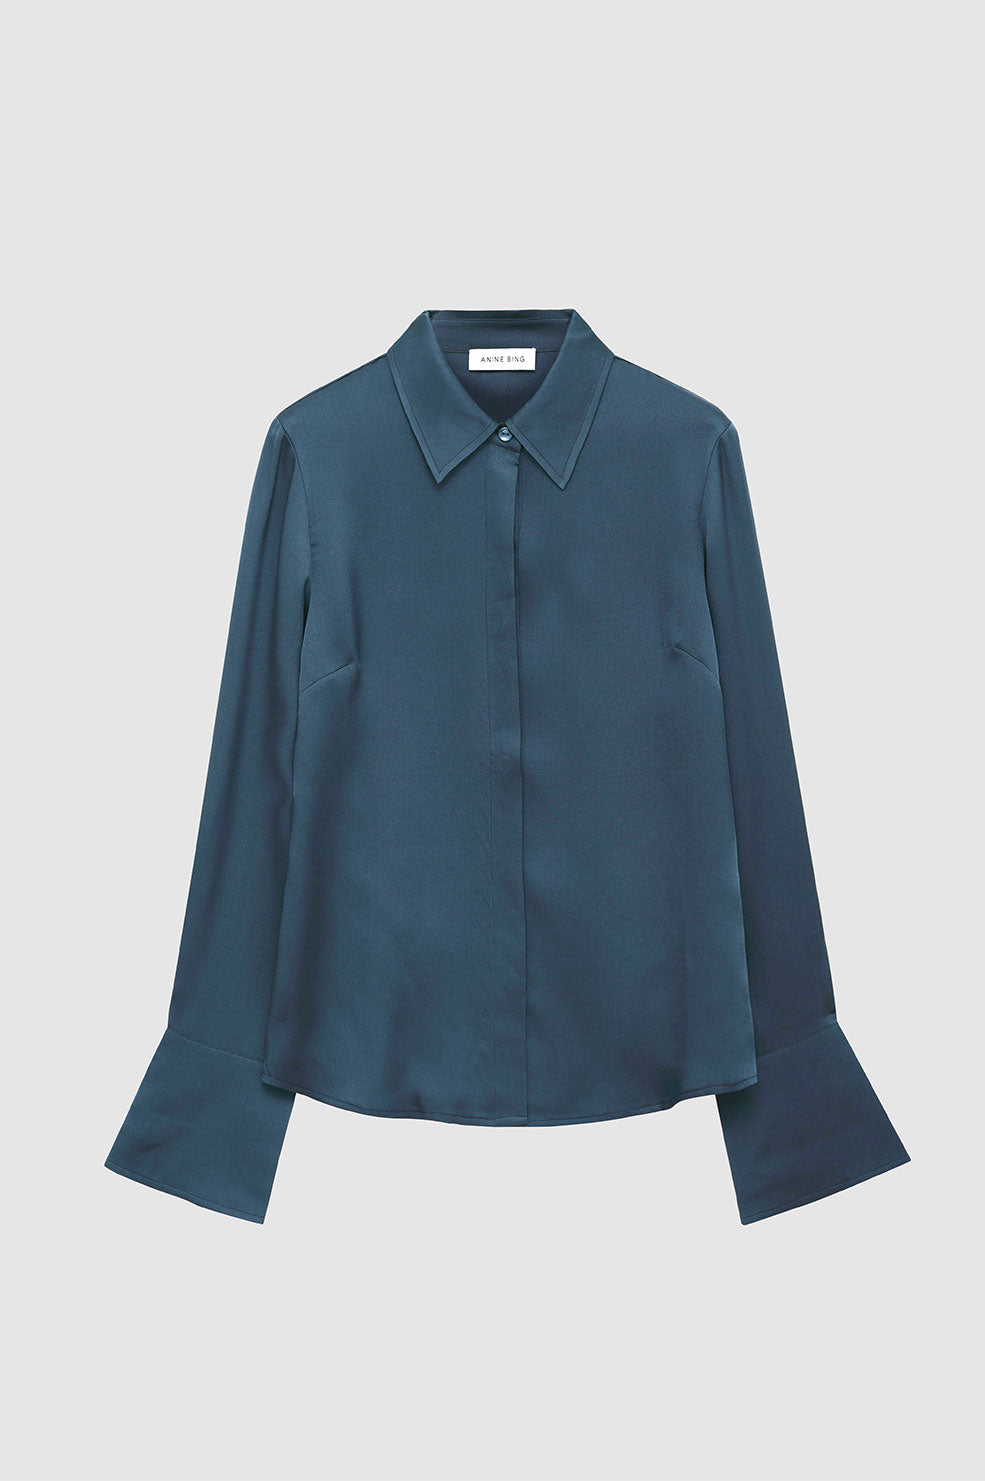 ANINE BING Neo Shirt - Steel Blue - Front View